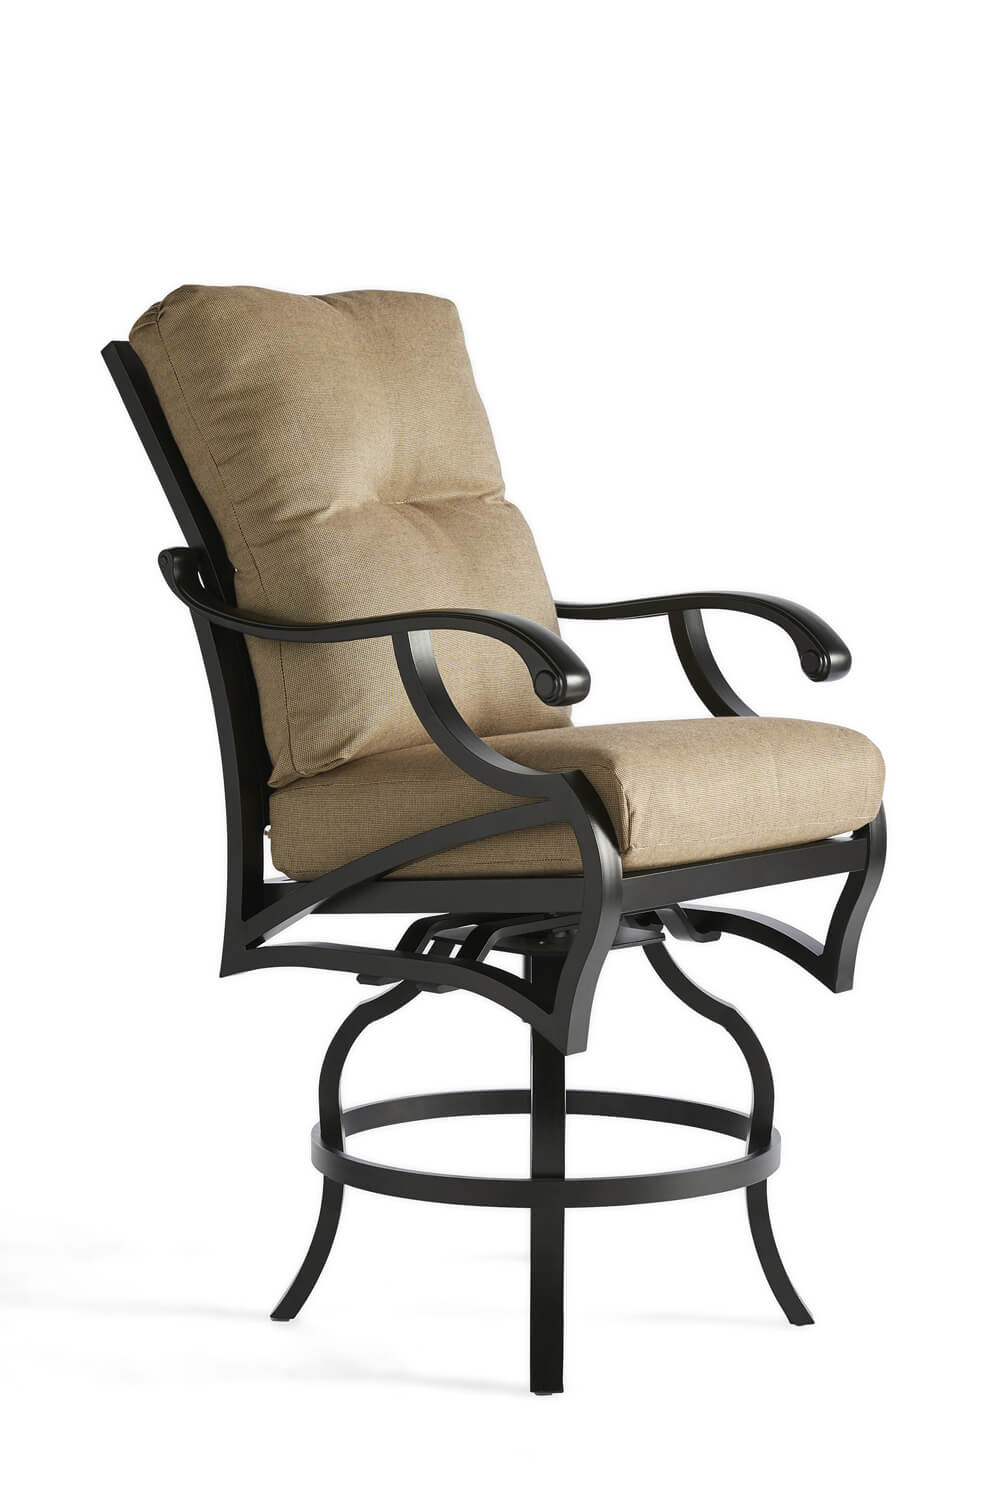 Mallin's Volare Outdoor Swivel Counter Stool with Arms